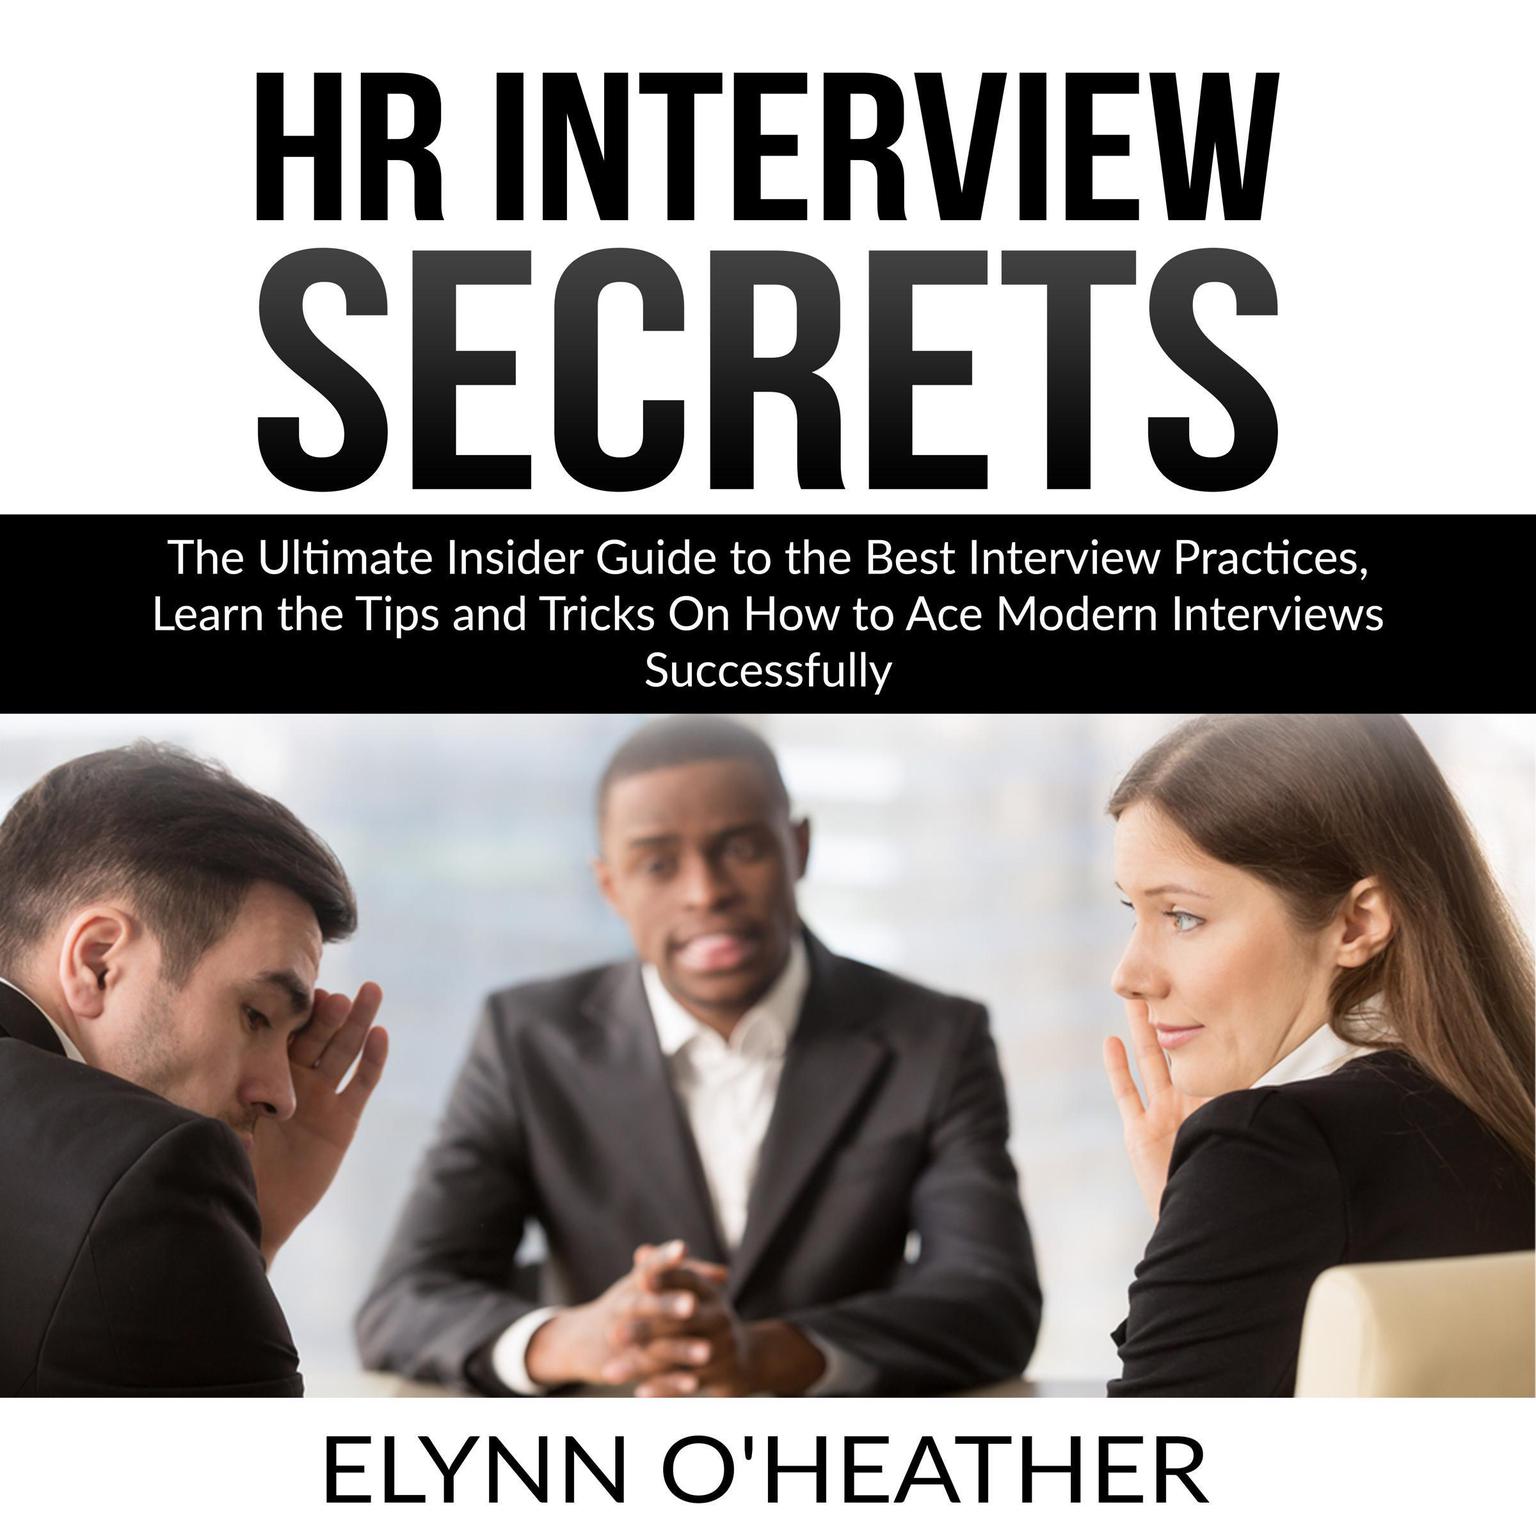 HR Interview Secrets: The Ultimate Insider Guide to the Best Interview Practices, Learn the Tips and Tricks On How to Ace Modern Interviews Successfully Audiobook, by Elynn O'Heather